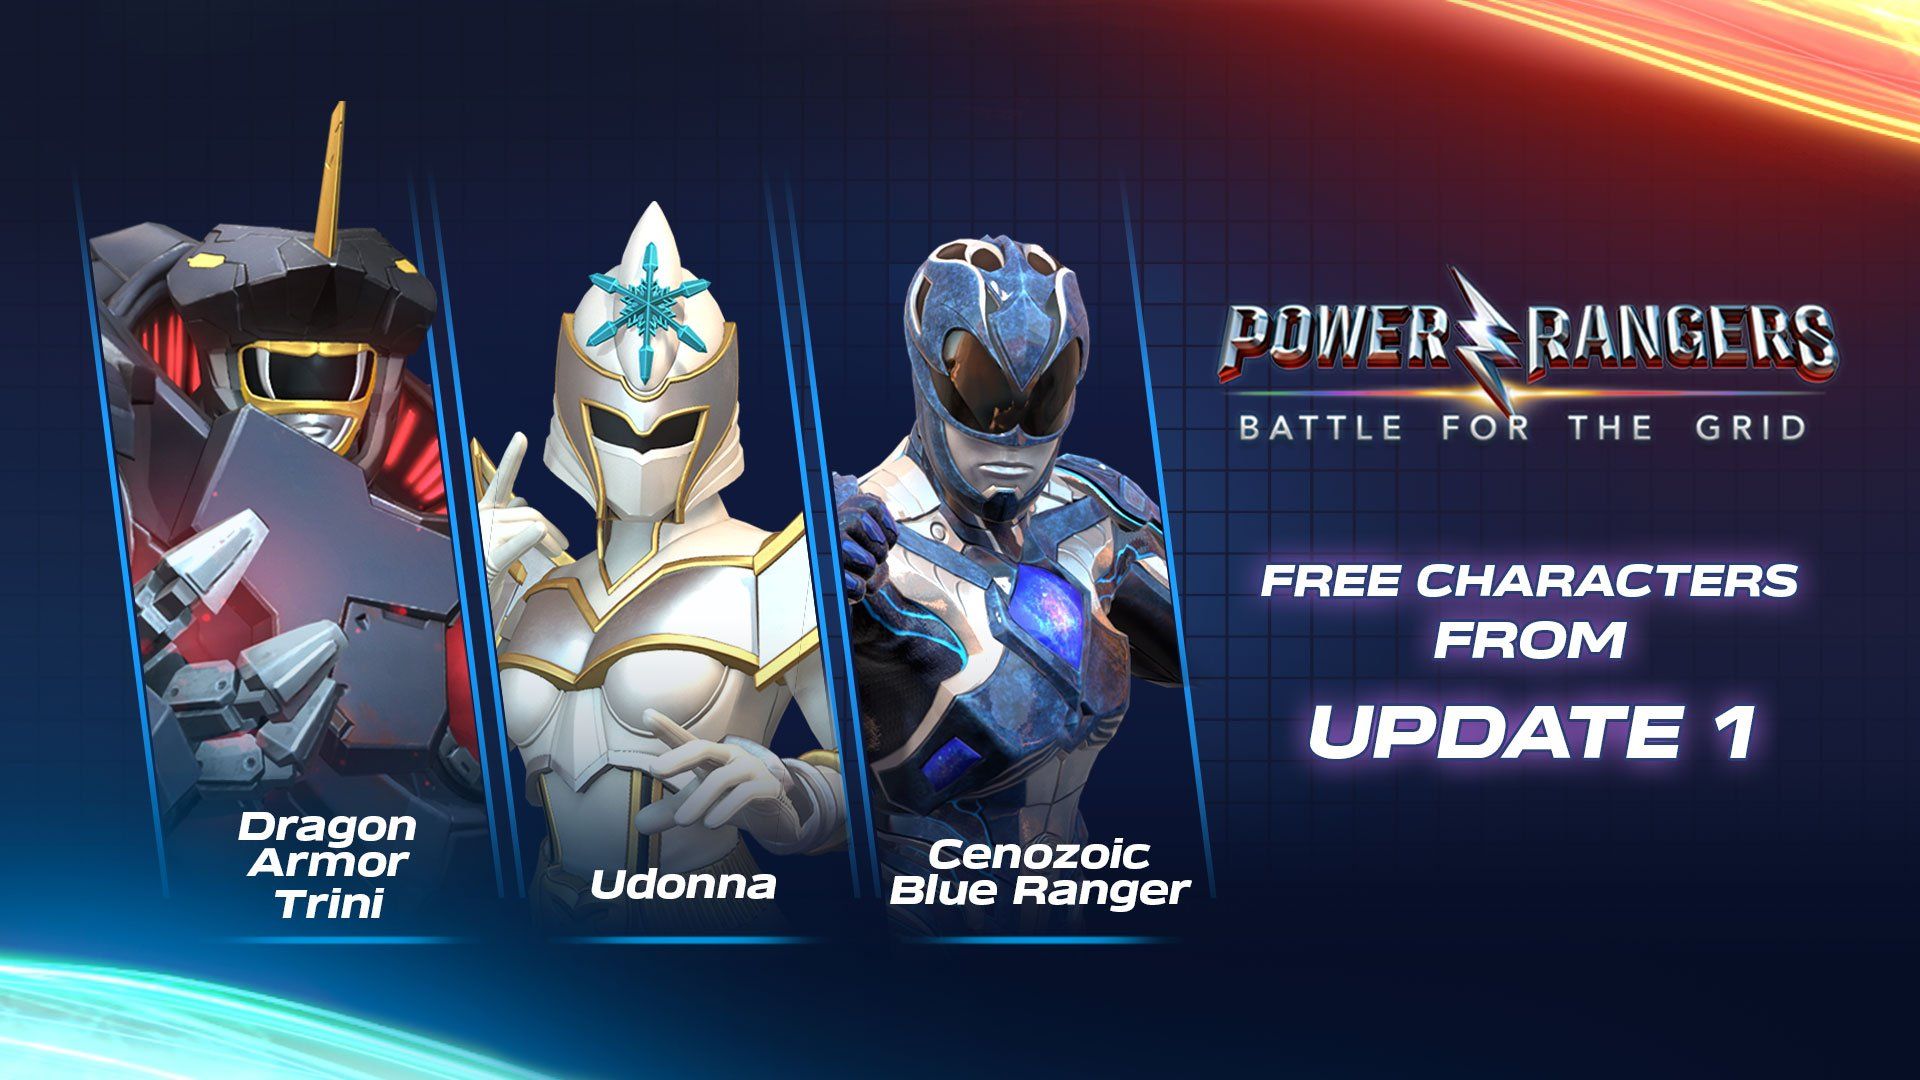 Power Rangers: Battle for the Grid free DLC characters Dragon